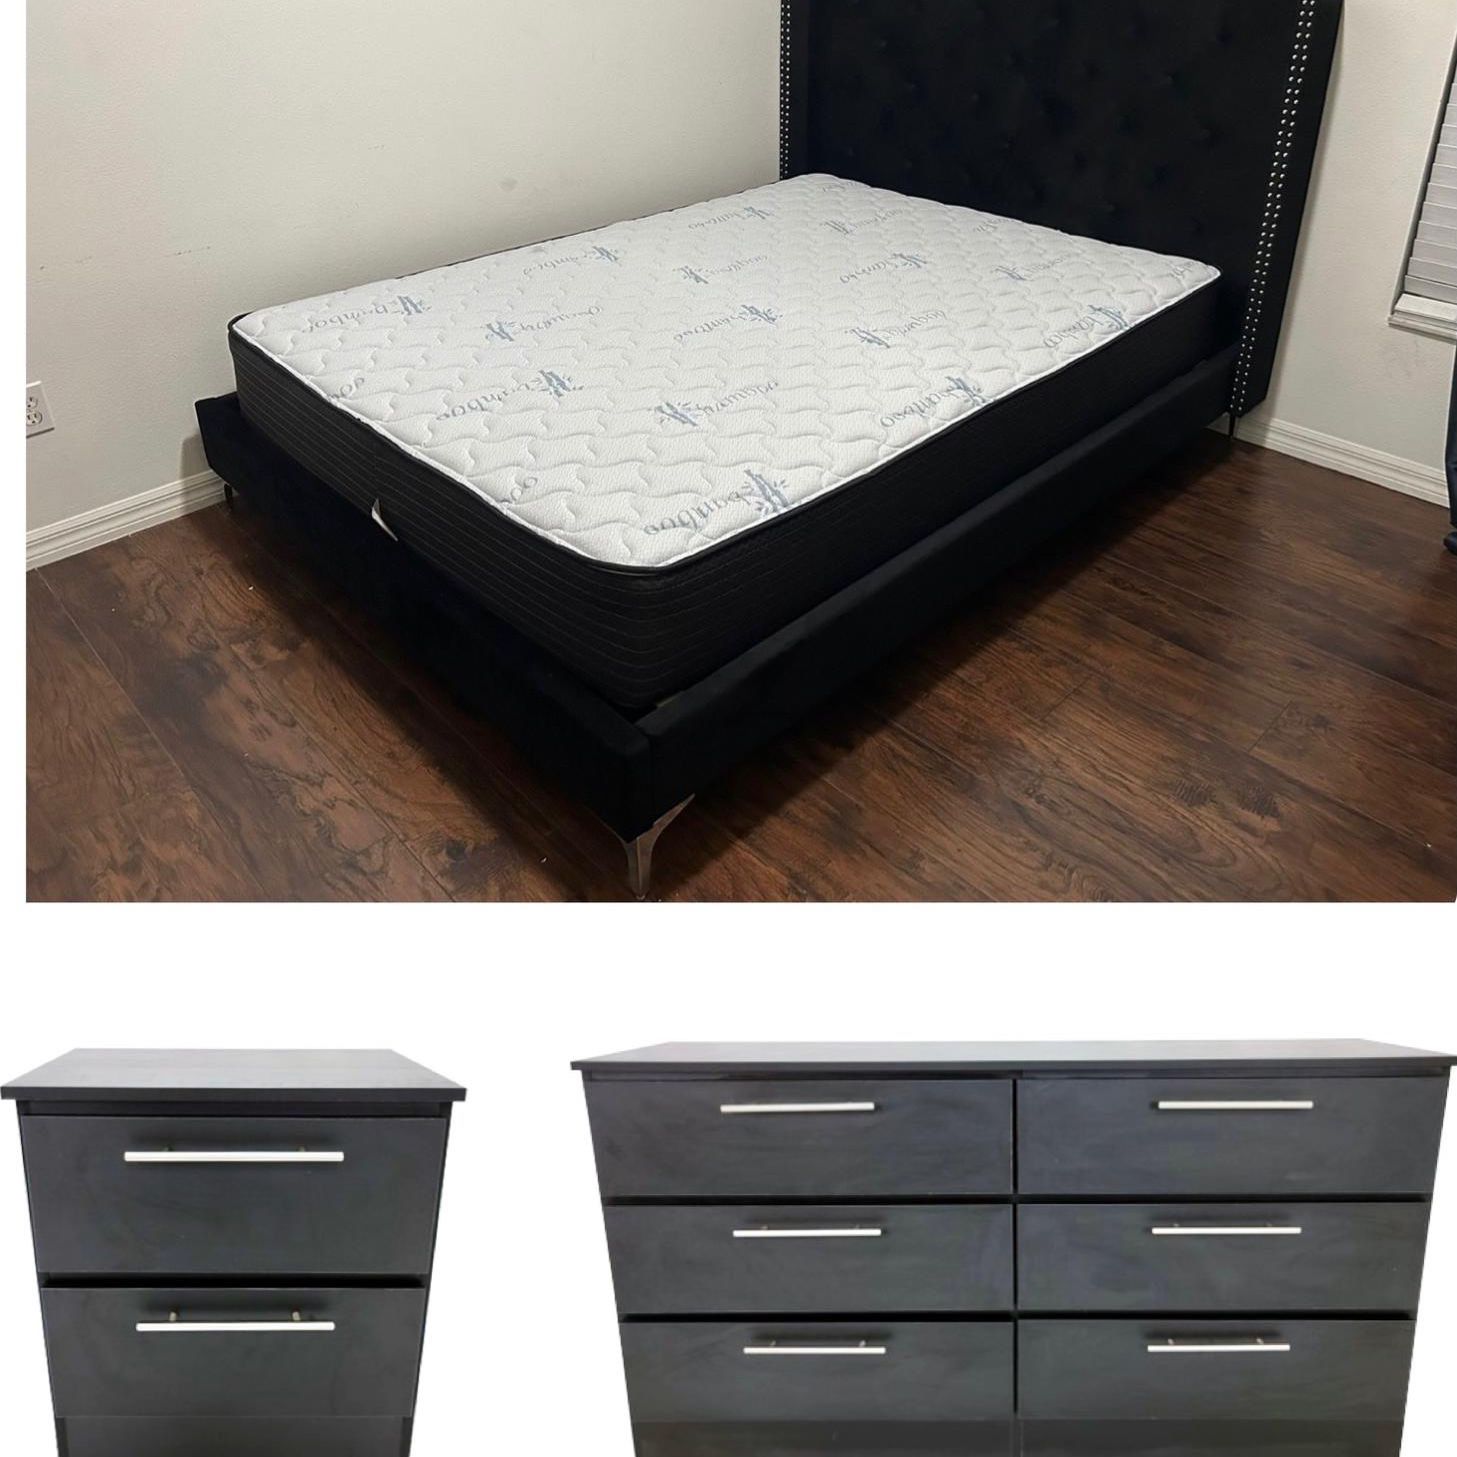 New Queen Bed Frame And Mattress And Dresser And 1 Nightstand And Free Delivery 🚚 